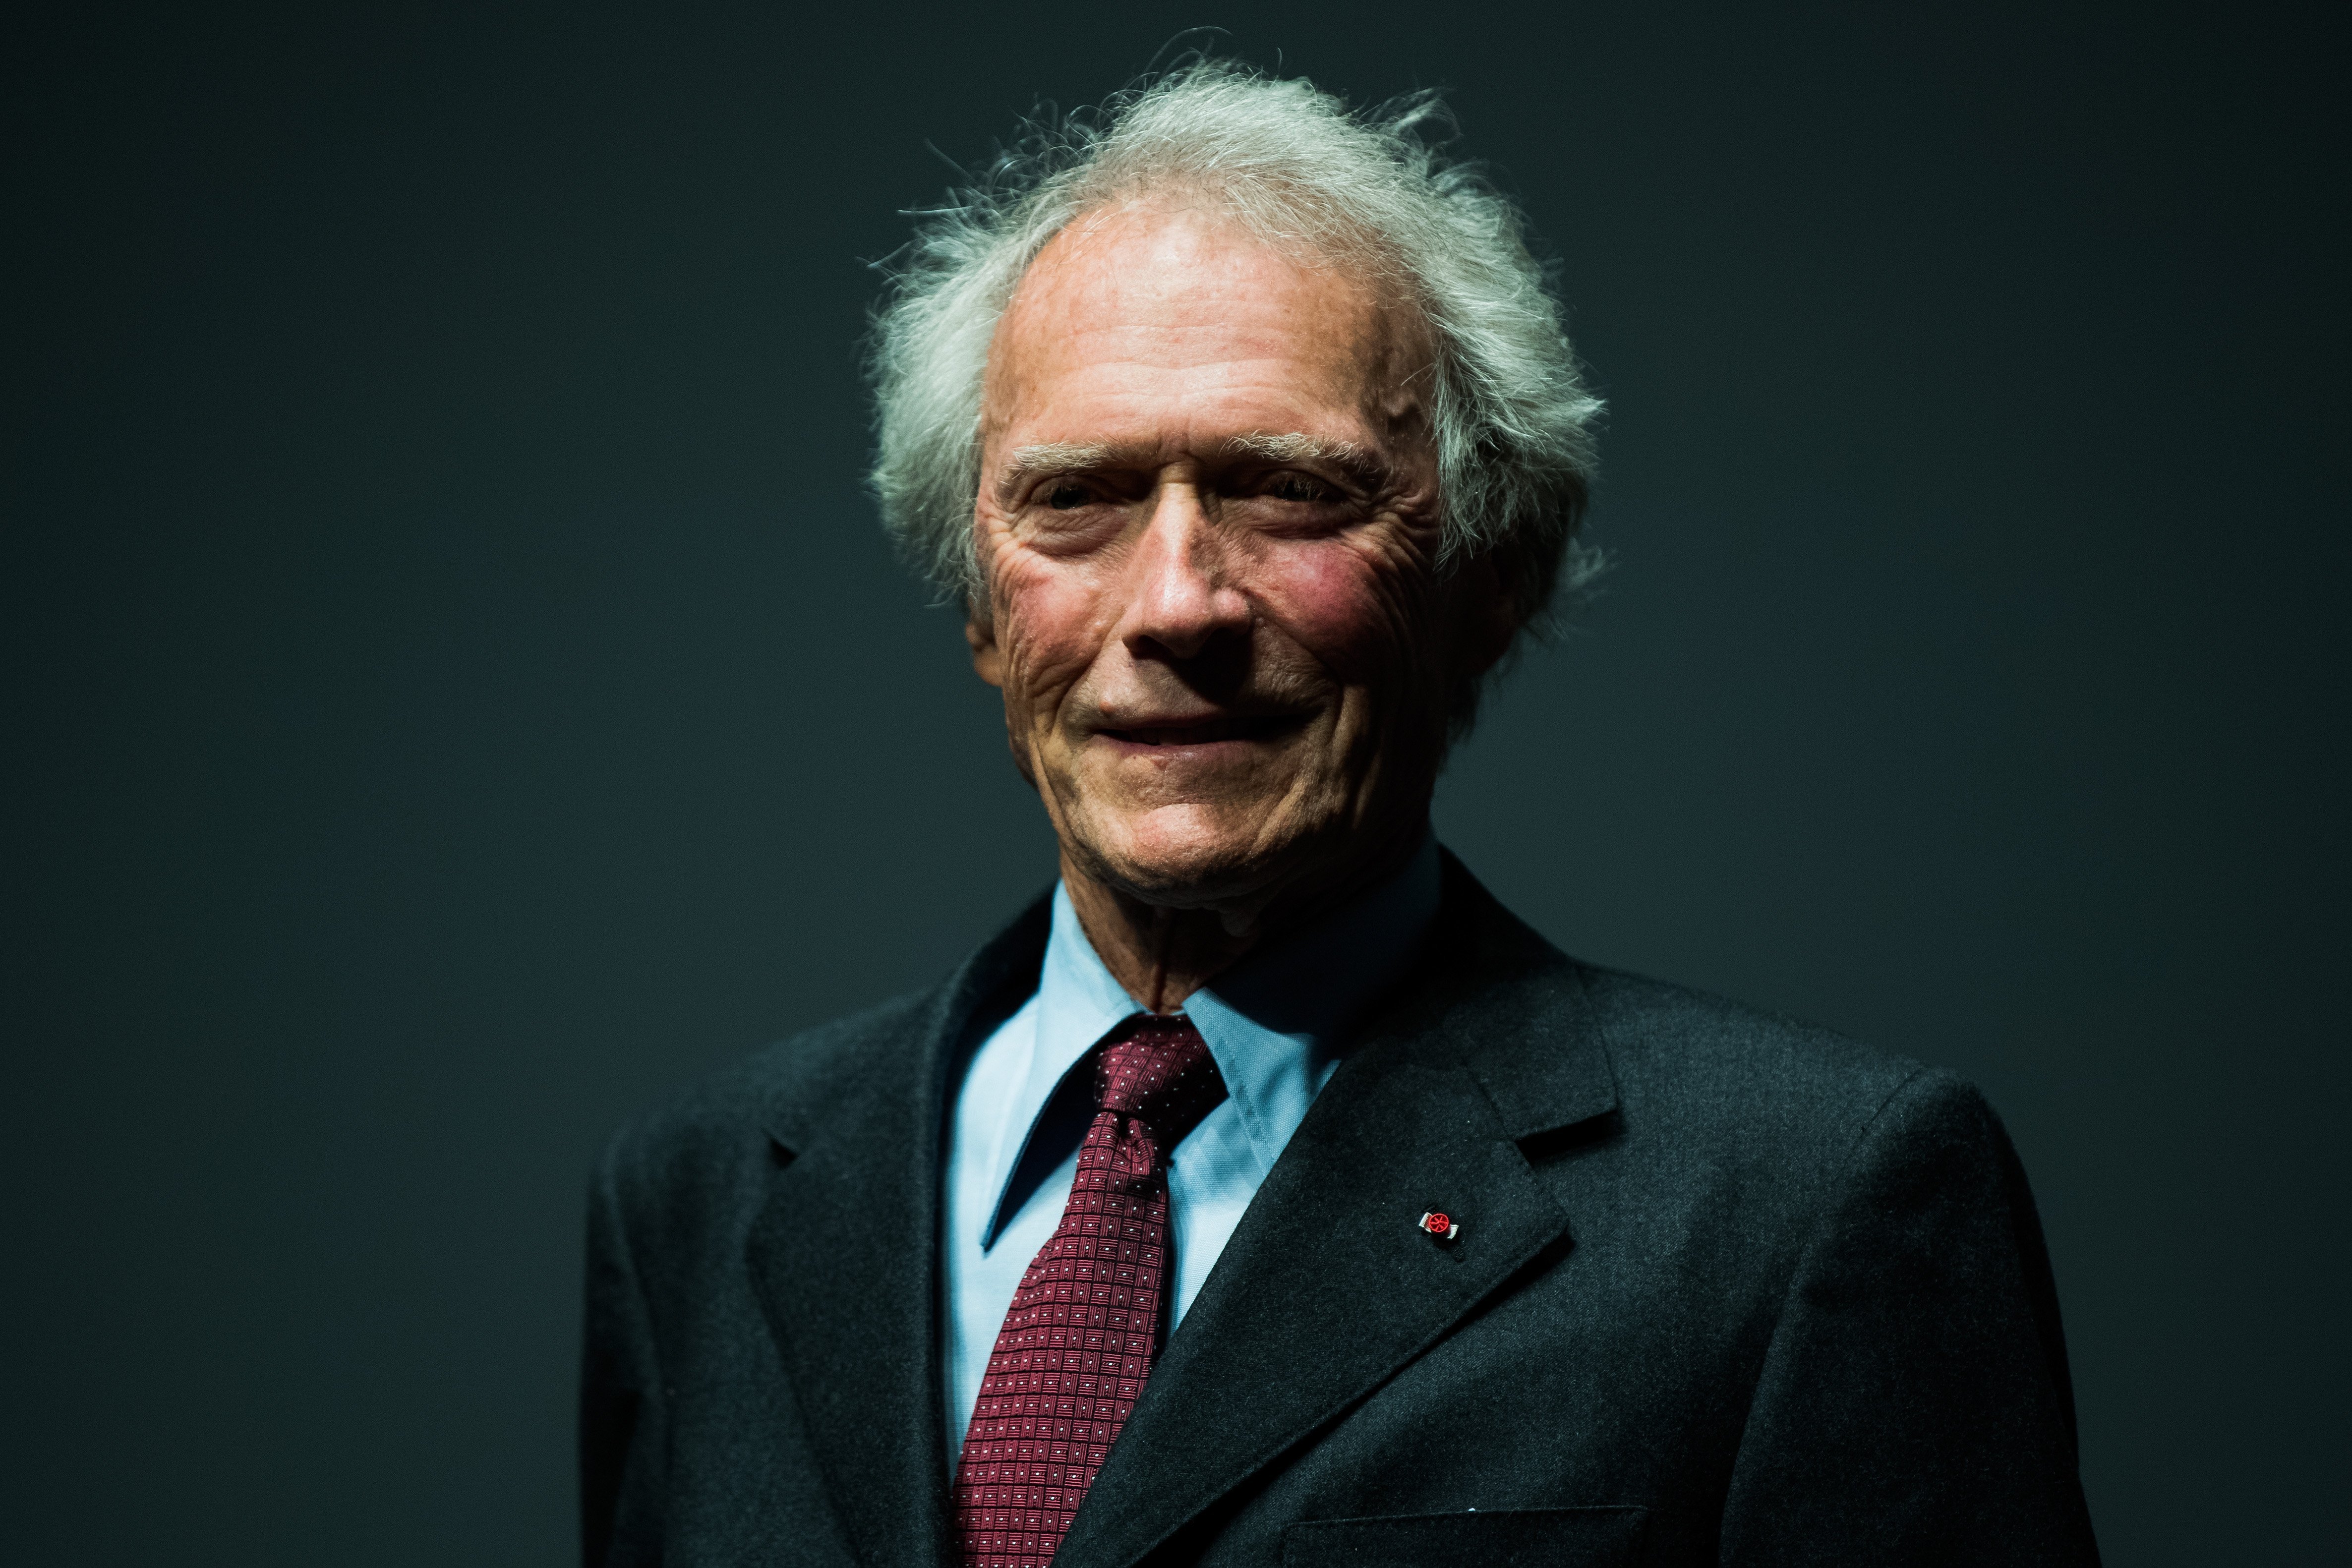 Clint Eastwood at the 70th annual Cannes Film Festival at Salle Debussy on May 20, 2017 | Photo: GettyImages